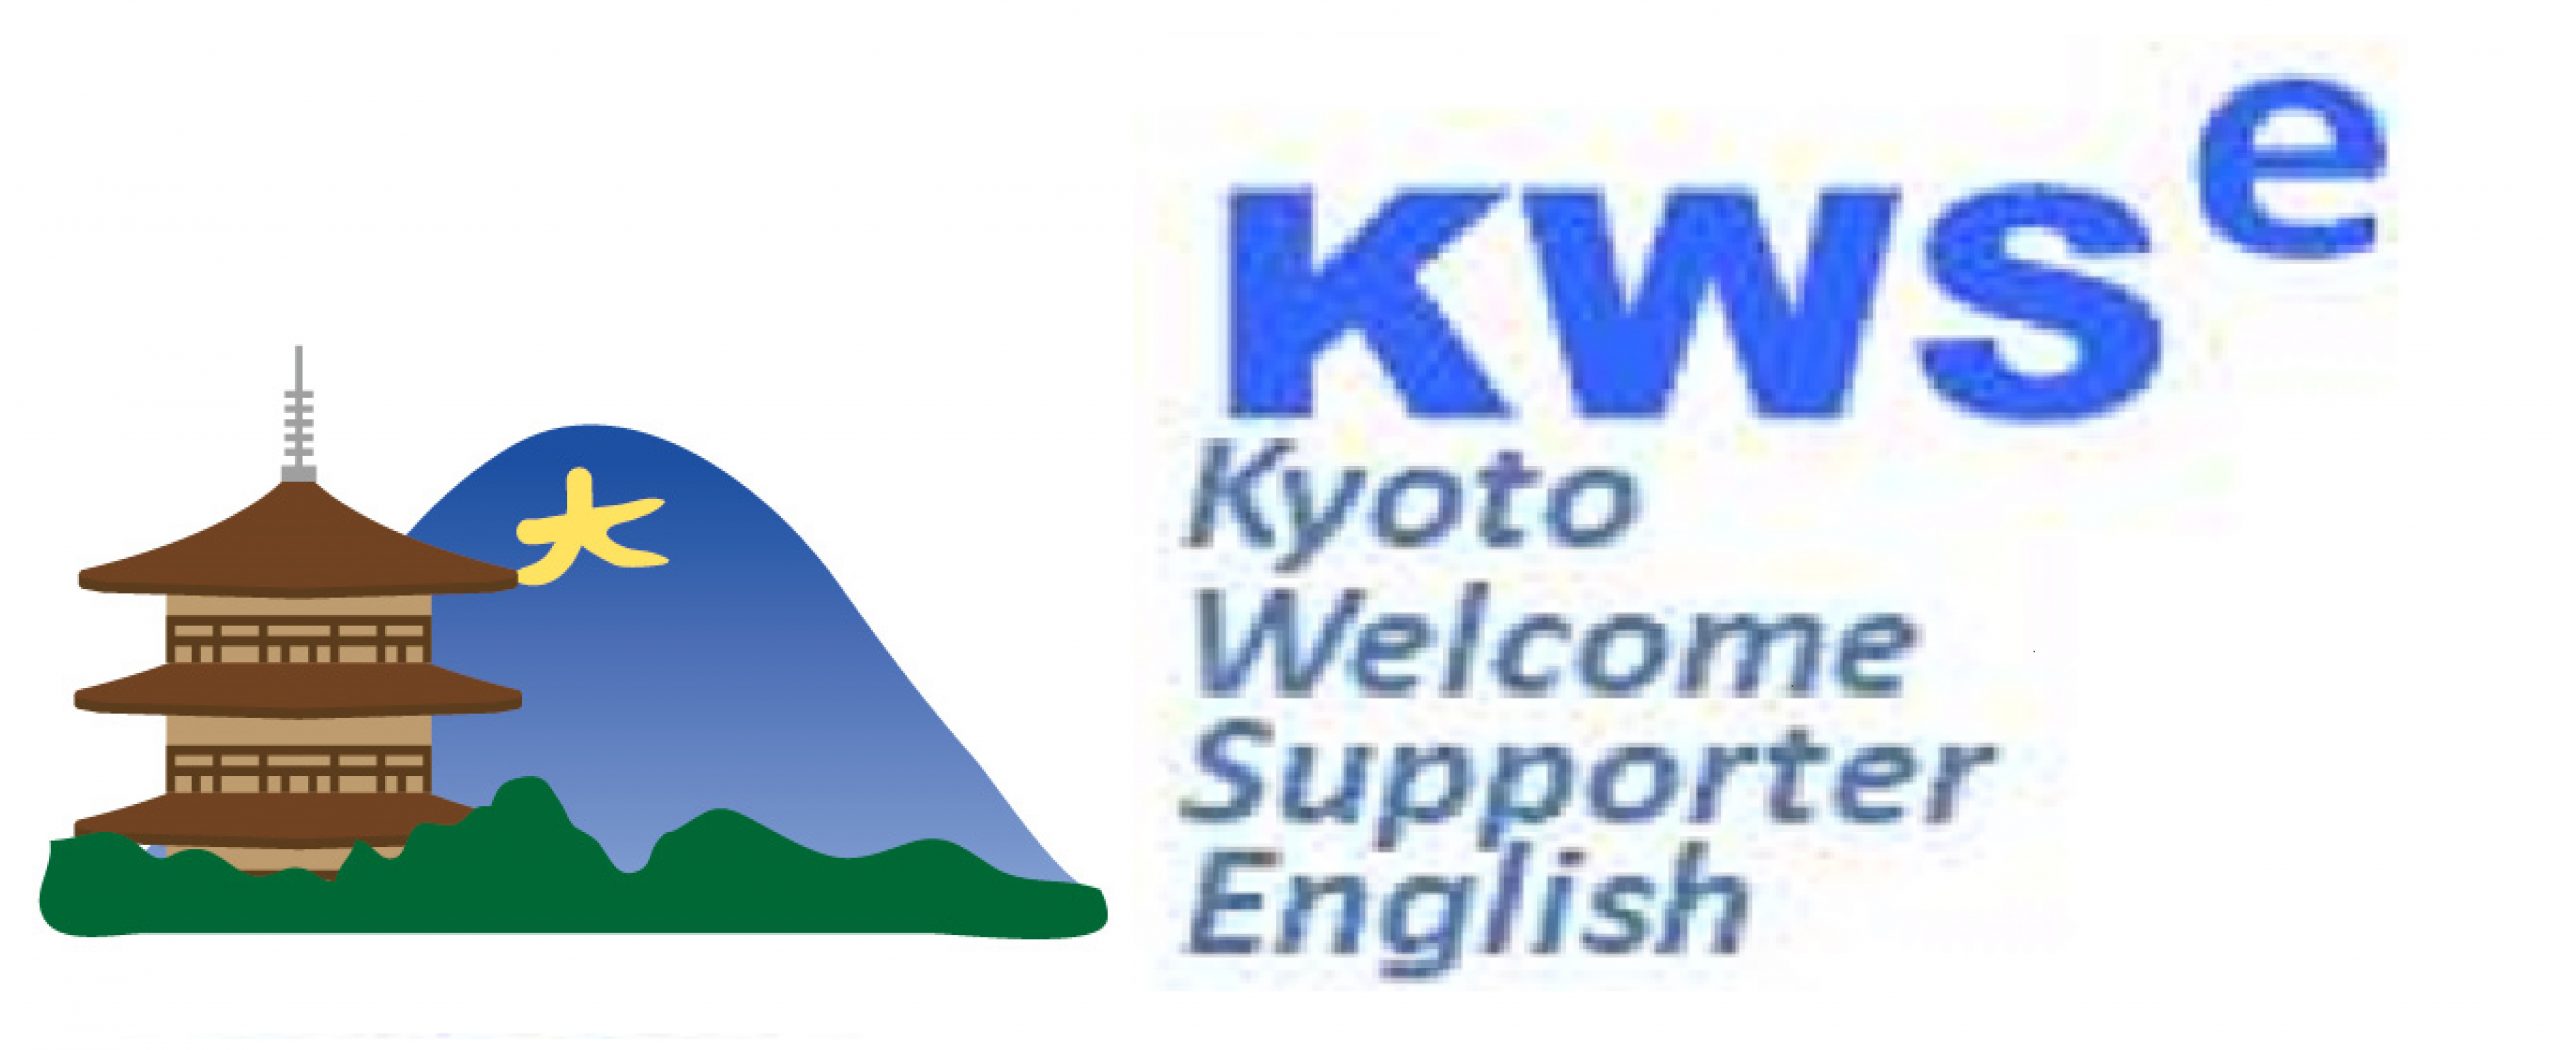 Kyoto Welcome Supporter English